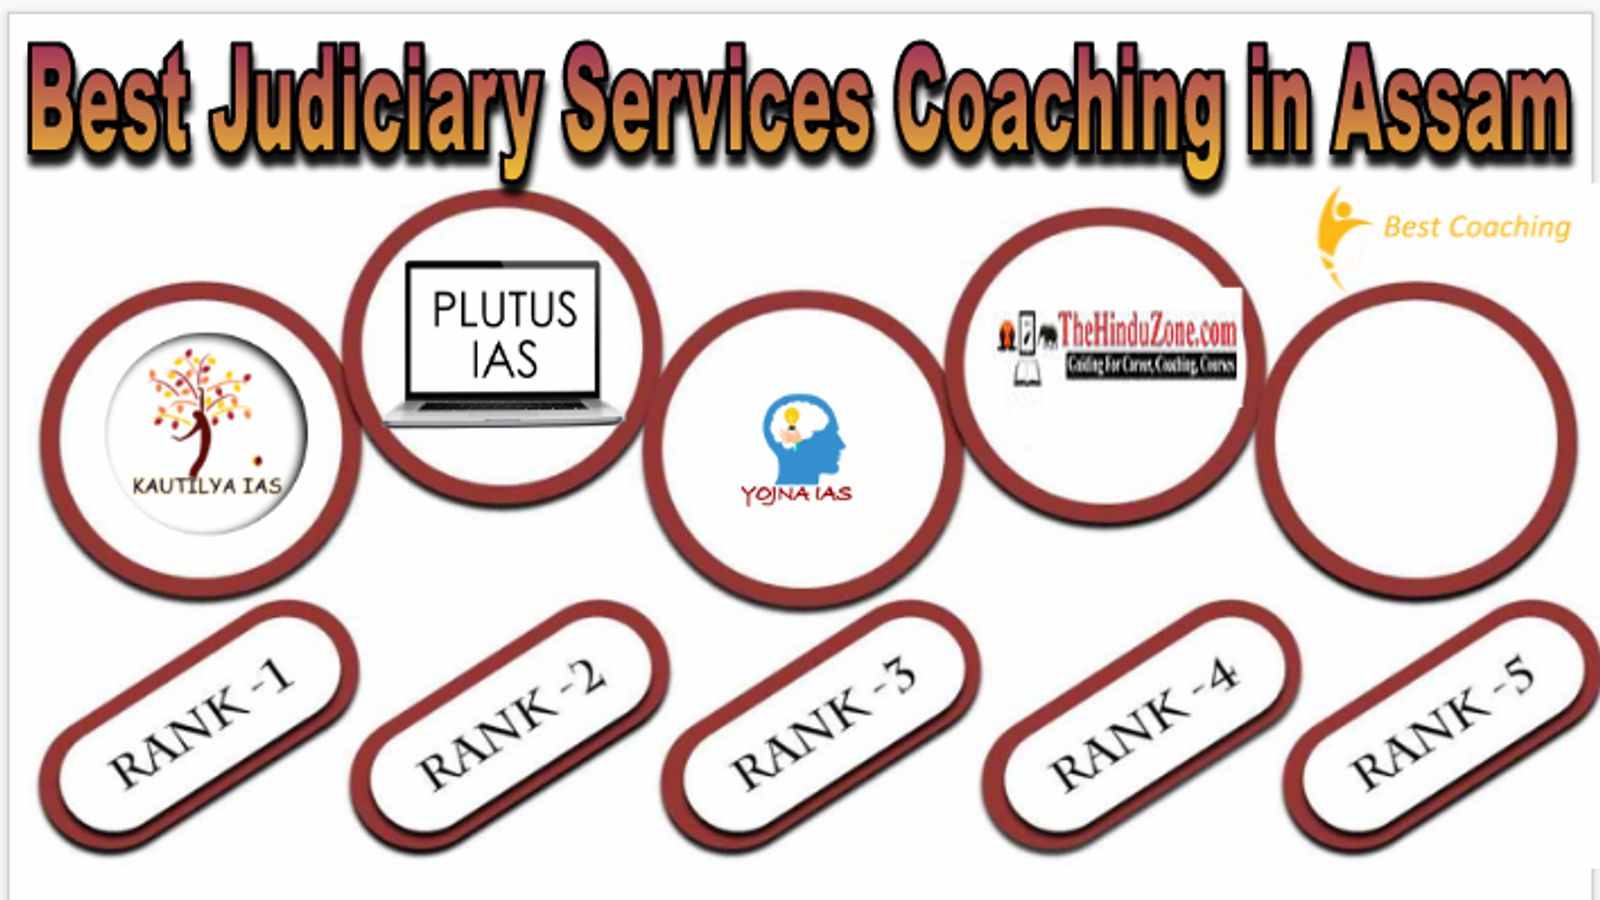 Best Judiciary Services Coaching in Assam